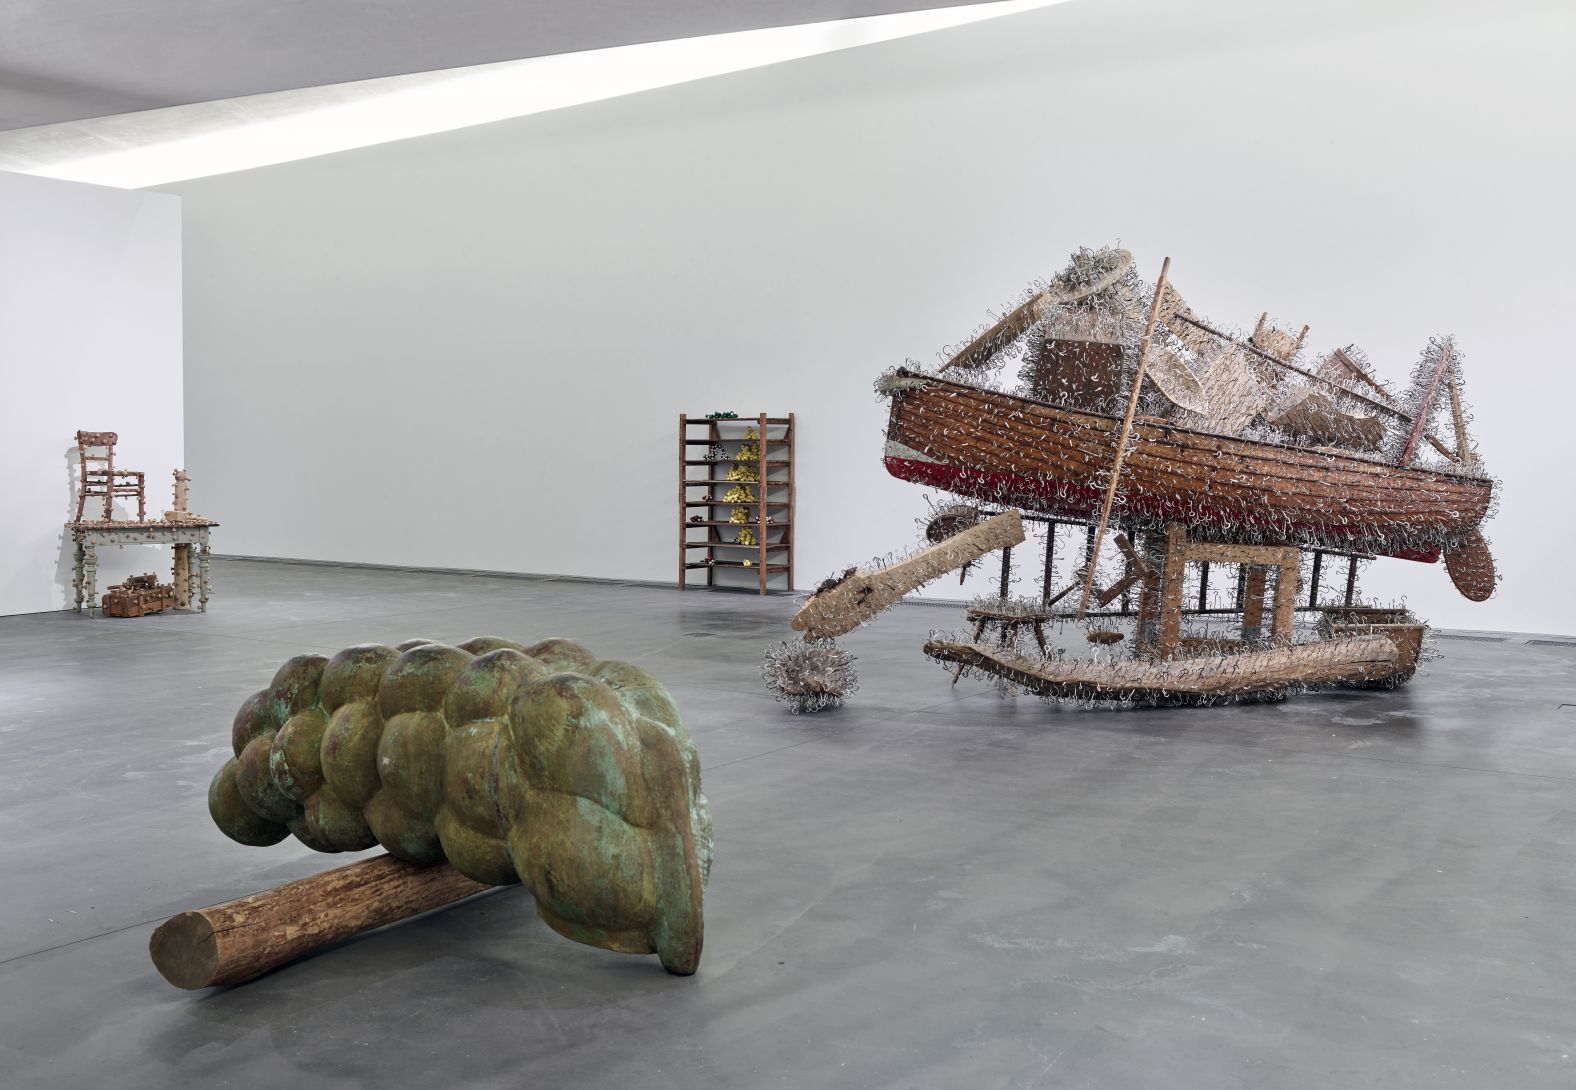 Tony Cragg "Made on Earth" in Denmark from 26 February to 22 August